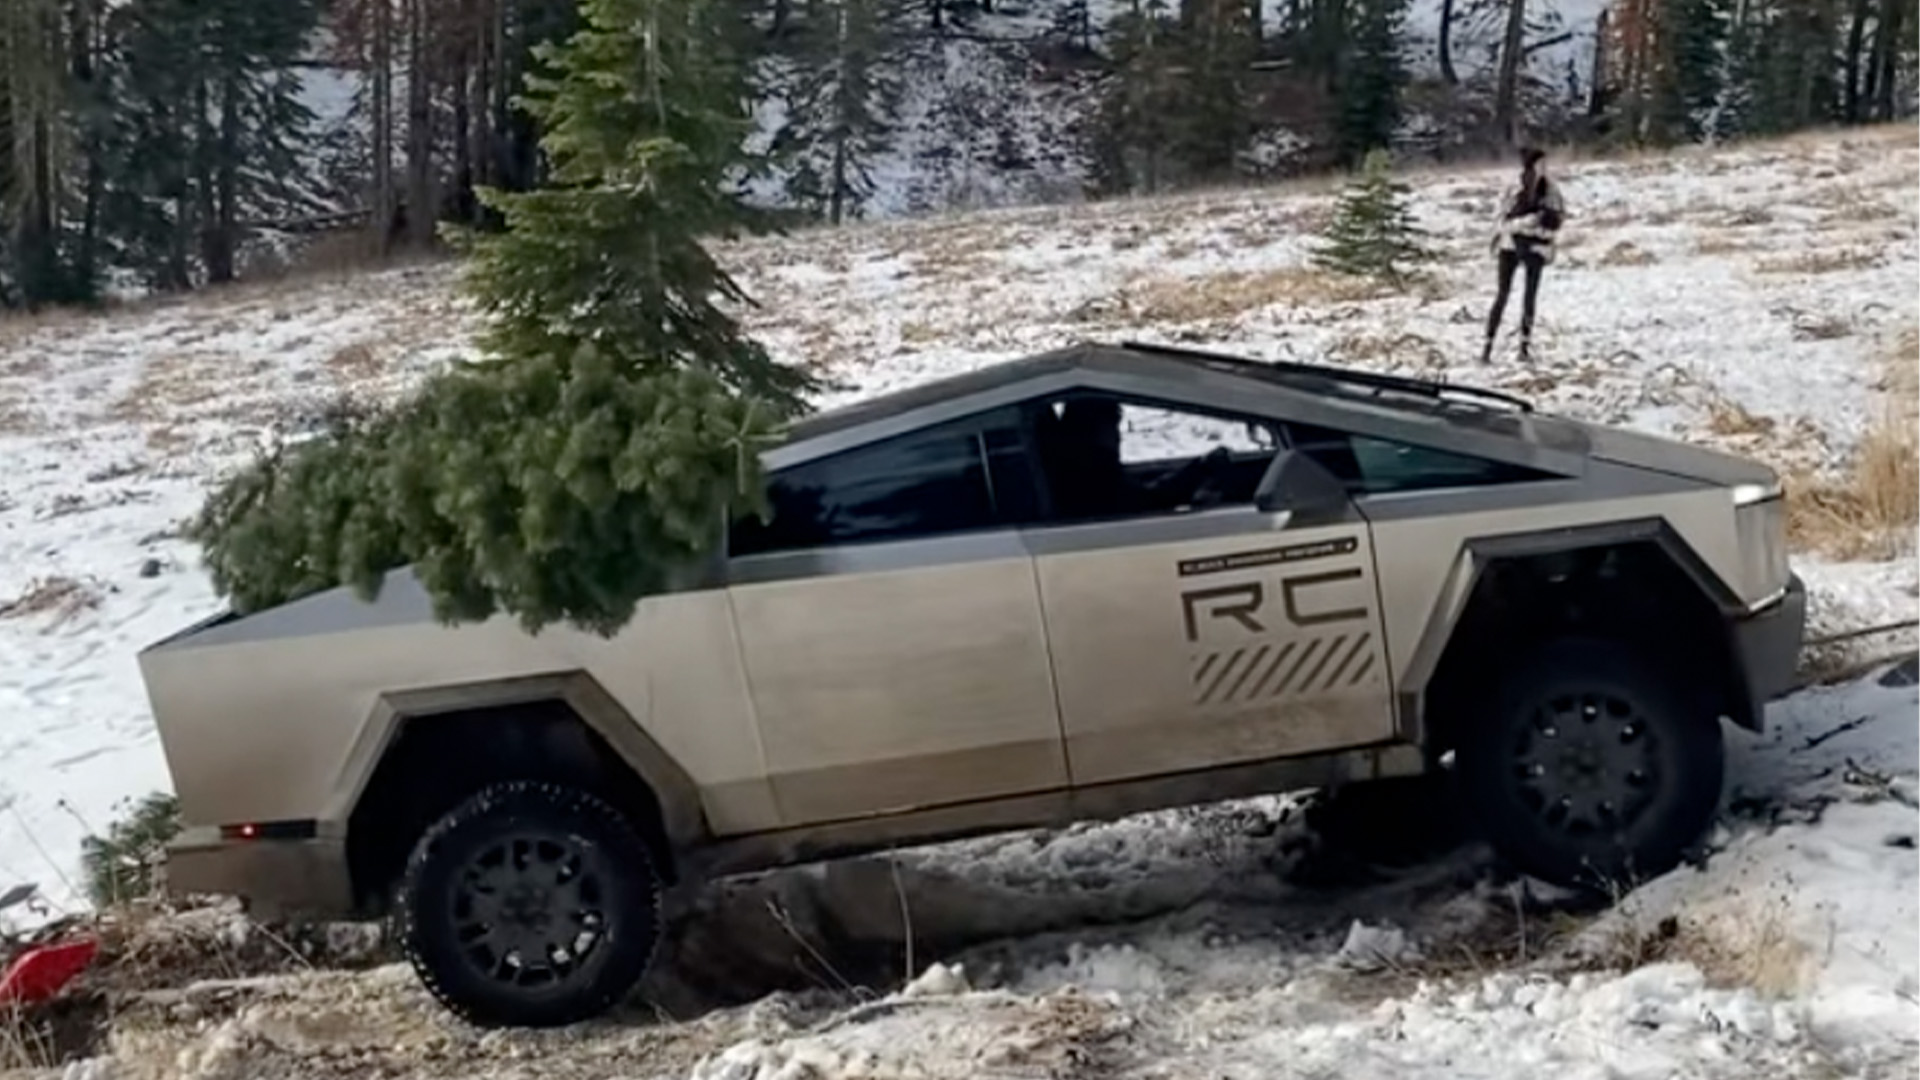 Tesla Cybertruck Shows Questionable Off-Road Abilities, Gets Rescued by Ford Super Duty